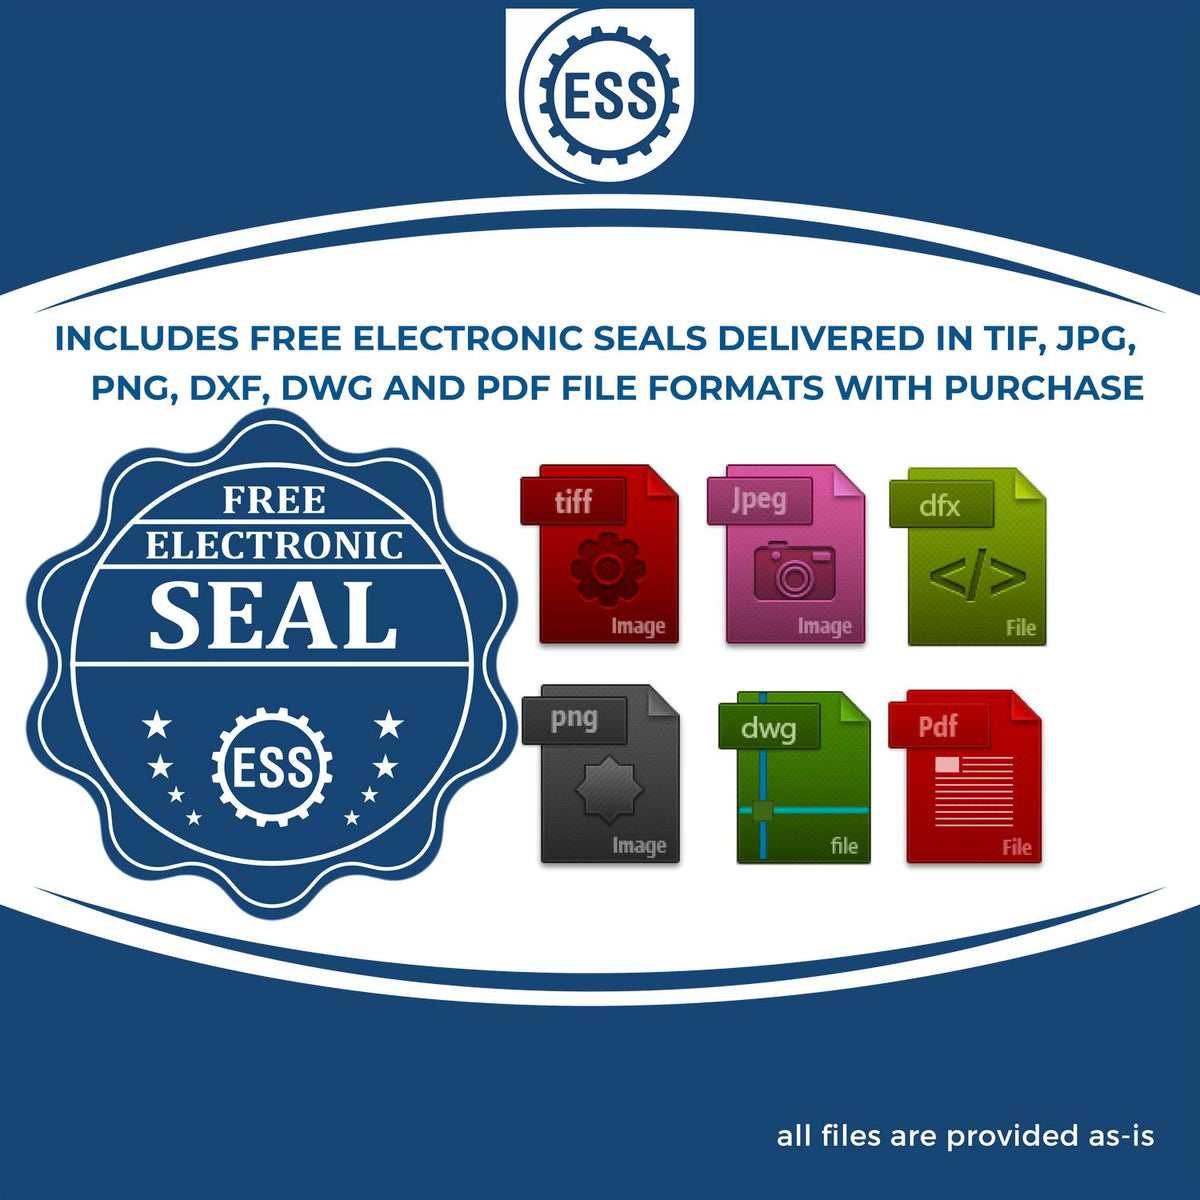 An infographic for the free electronic seal for the Self-Inking Utah Landscape Architect Stamp illustrating the different file type icons such as DXF, DWG, TIF, JPG and PNG.